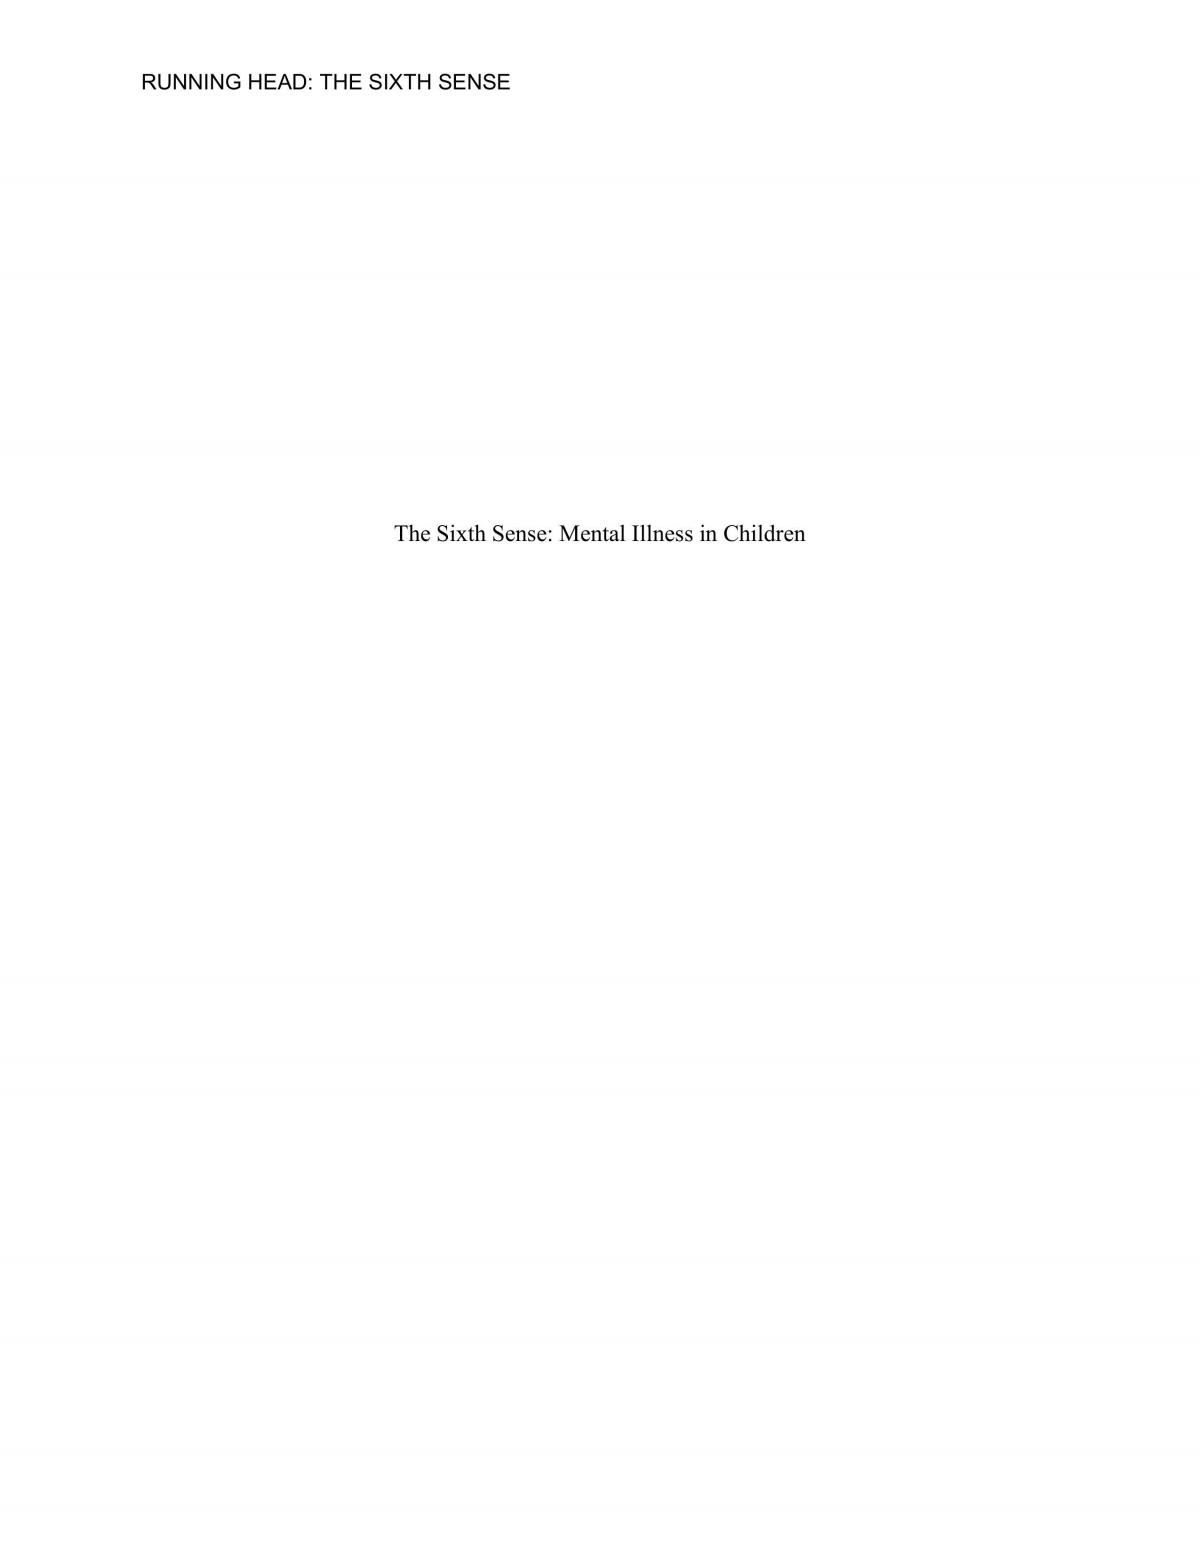 The Sixth Sense: Mental Illness in Children - Page 1